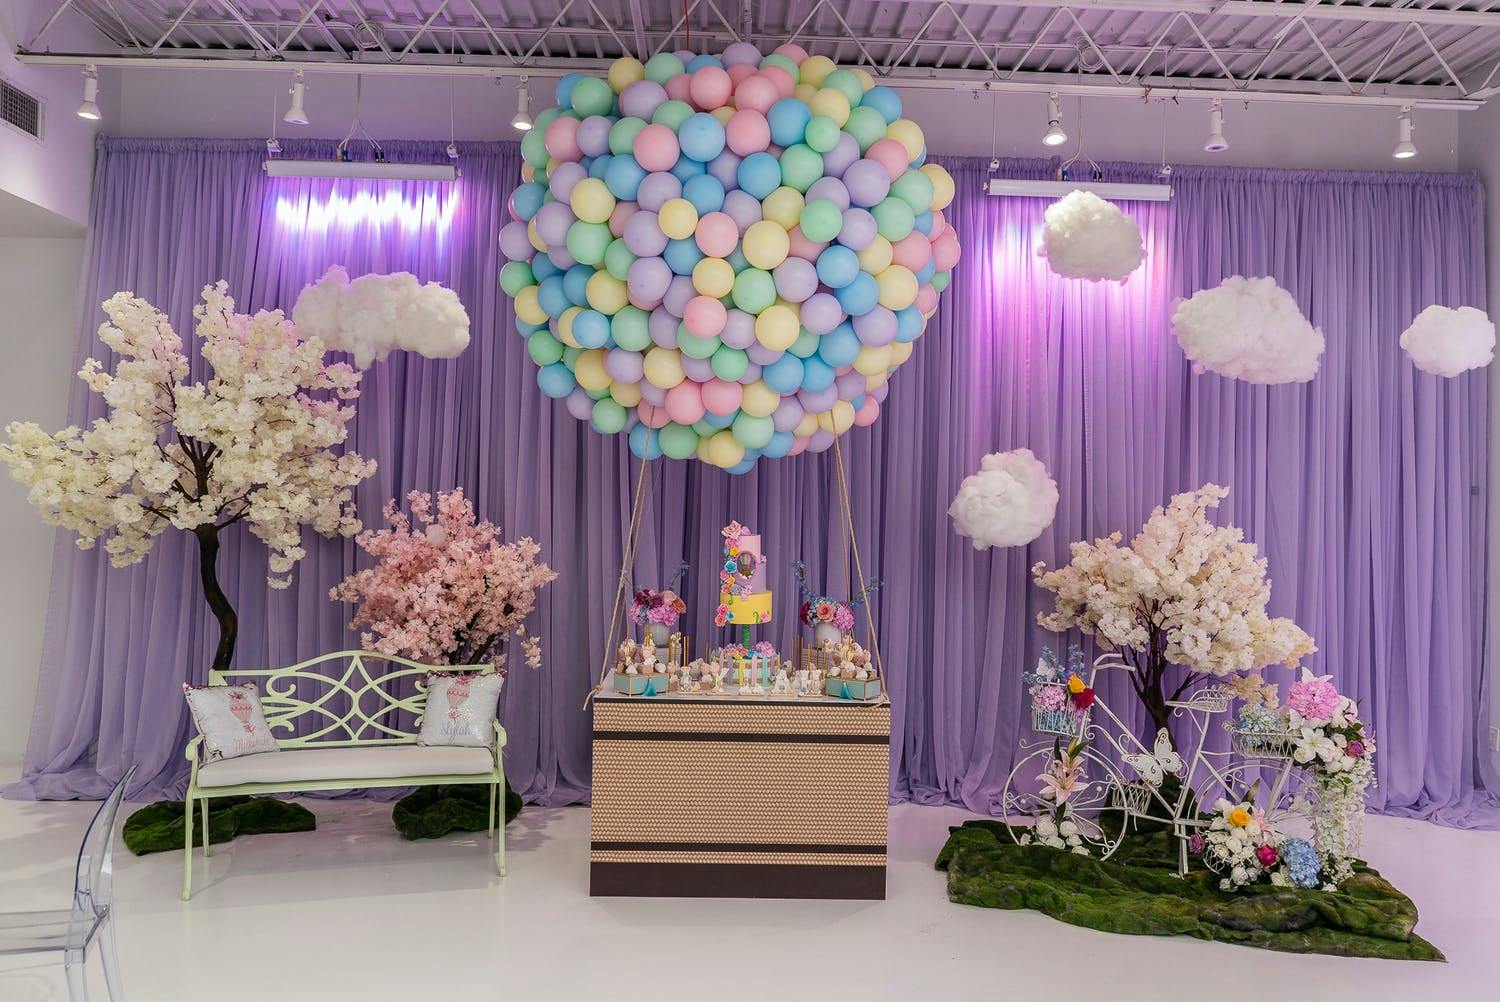 Hot Air Balloon-Themed Baby Shower with Violet Uplighting and Giant Hot Air Balloon Installation Made With Balloons | PartySlate